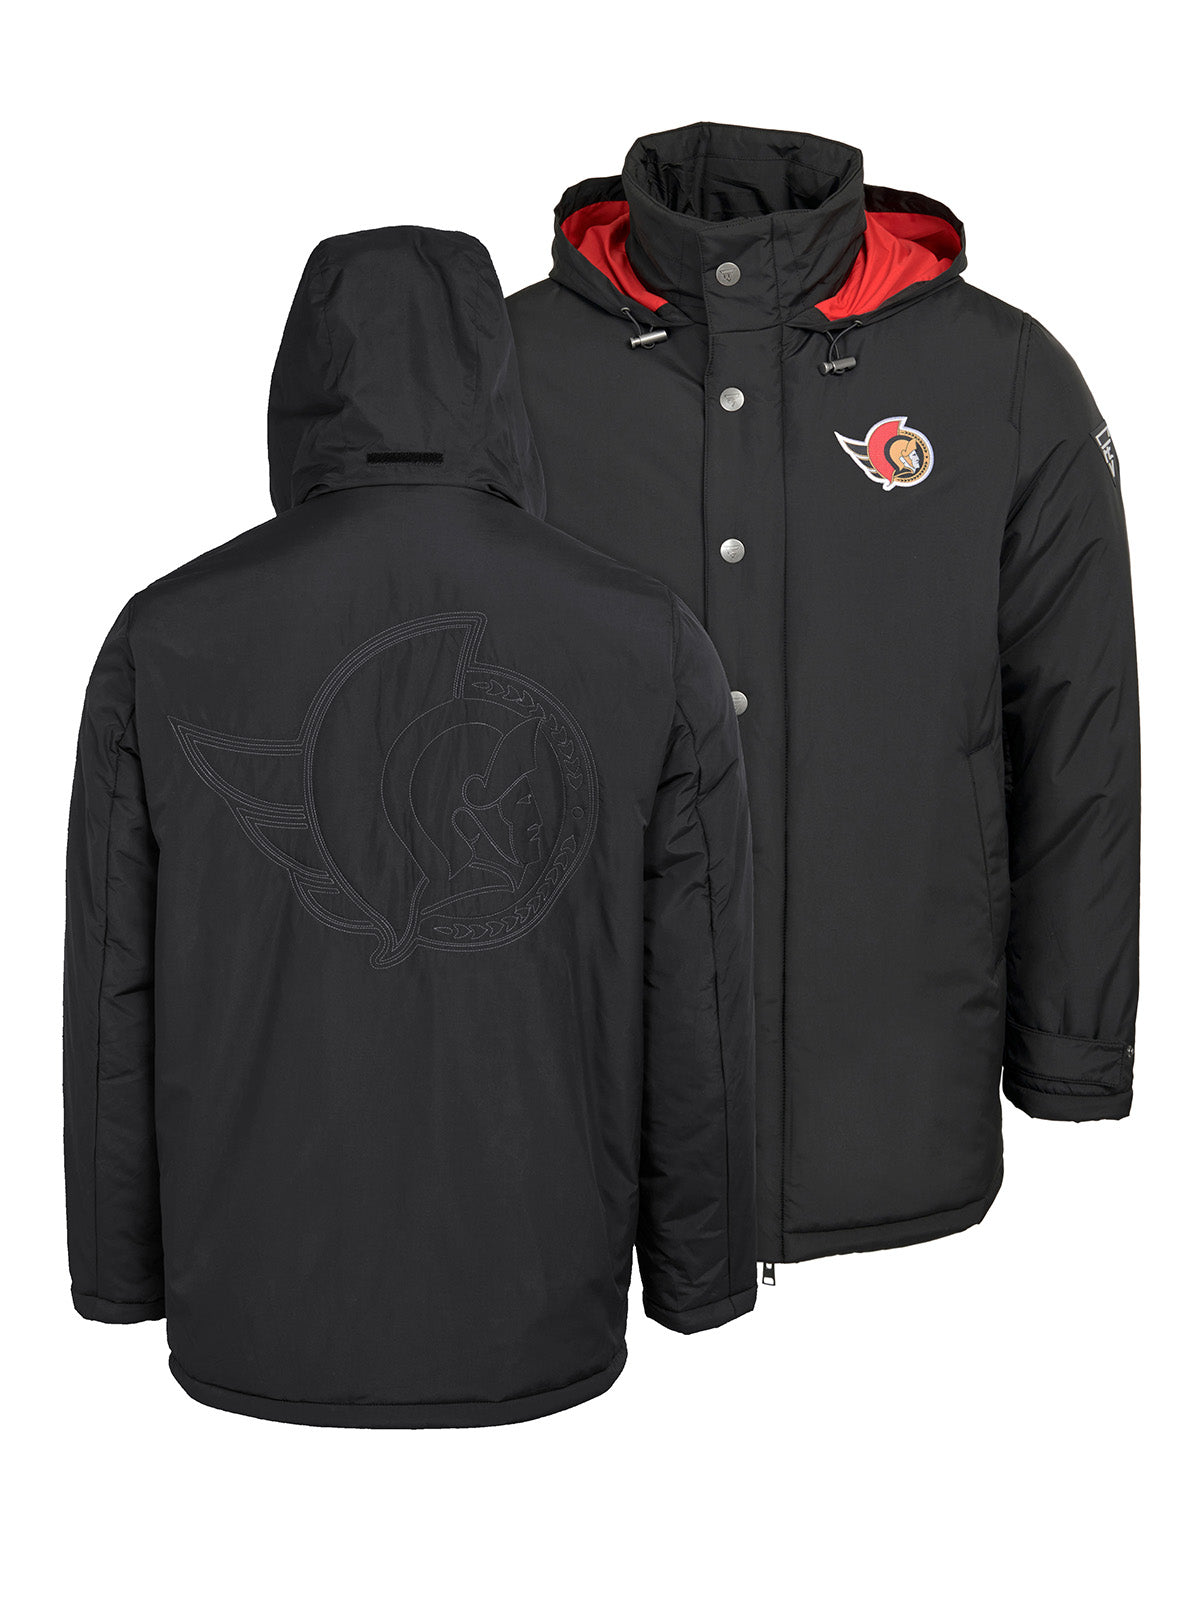 Ottawa Senators Coach's Jacket - The jacket features a quilted stitch of the Ottawa Senators logo centered on the back and has a removal hood in the team colors, elevating this NHL hockey clothing collection